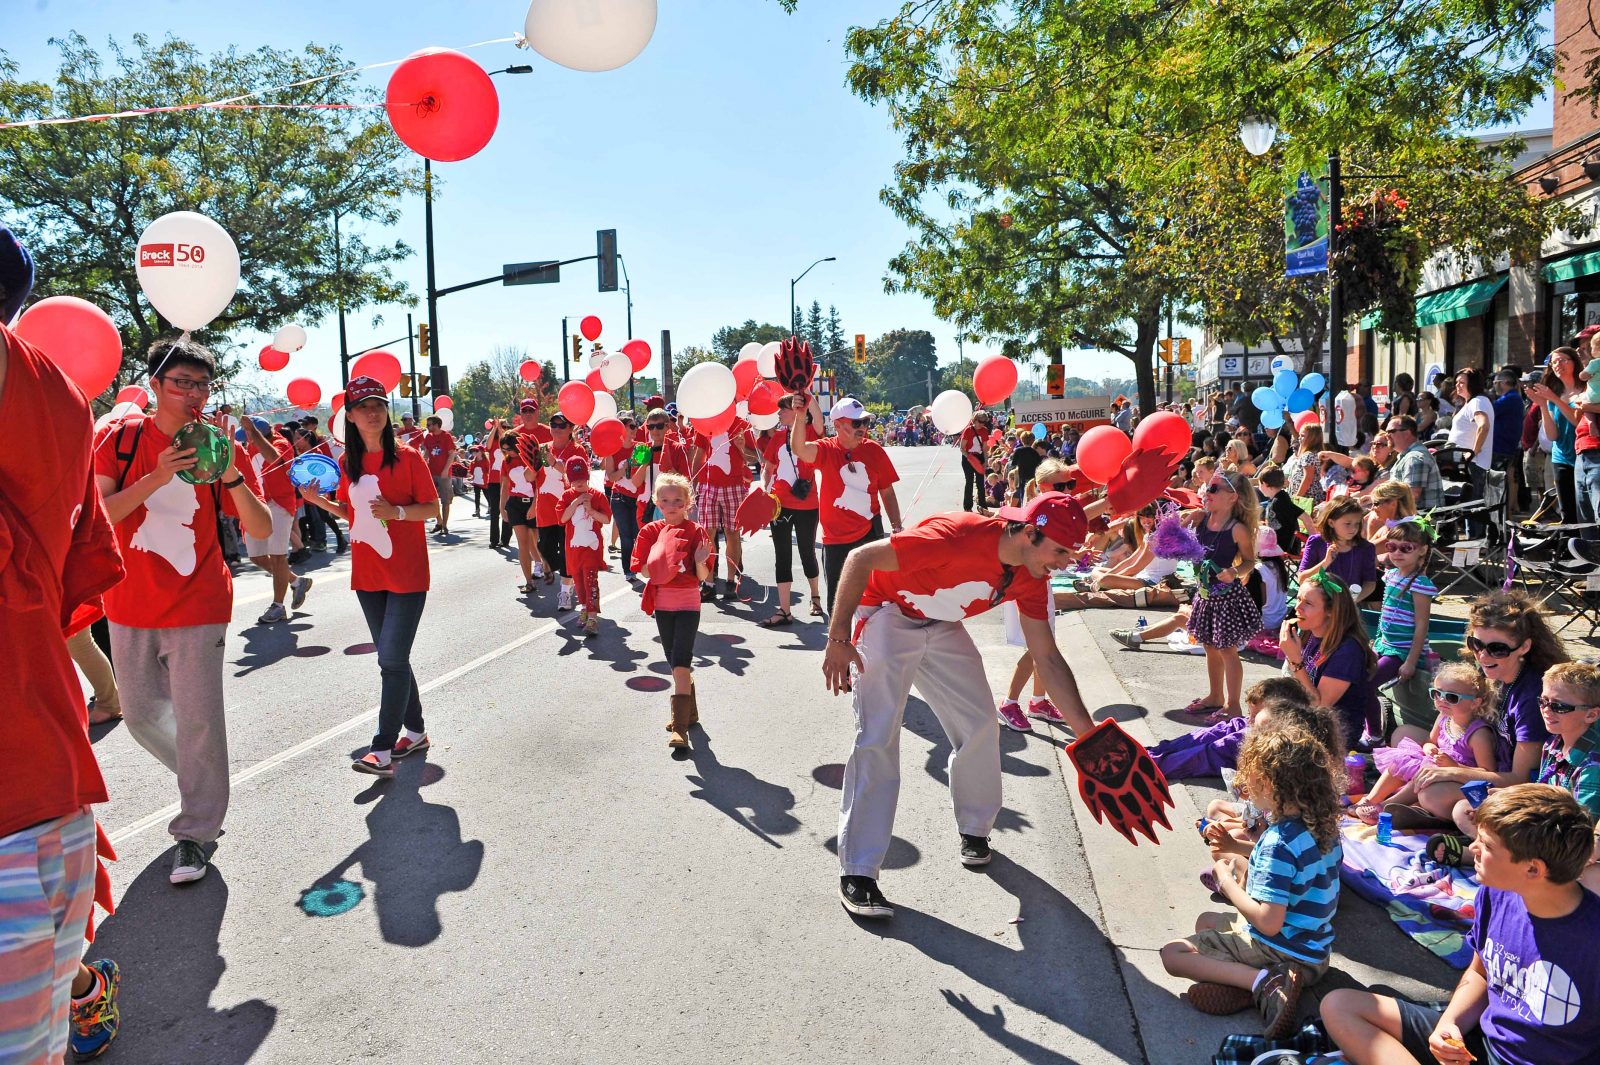 A crowd of people in red shirts carrying red balloons walks along a parade route lined with people.